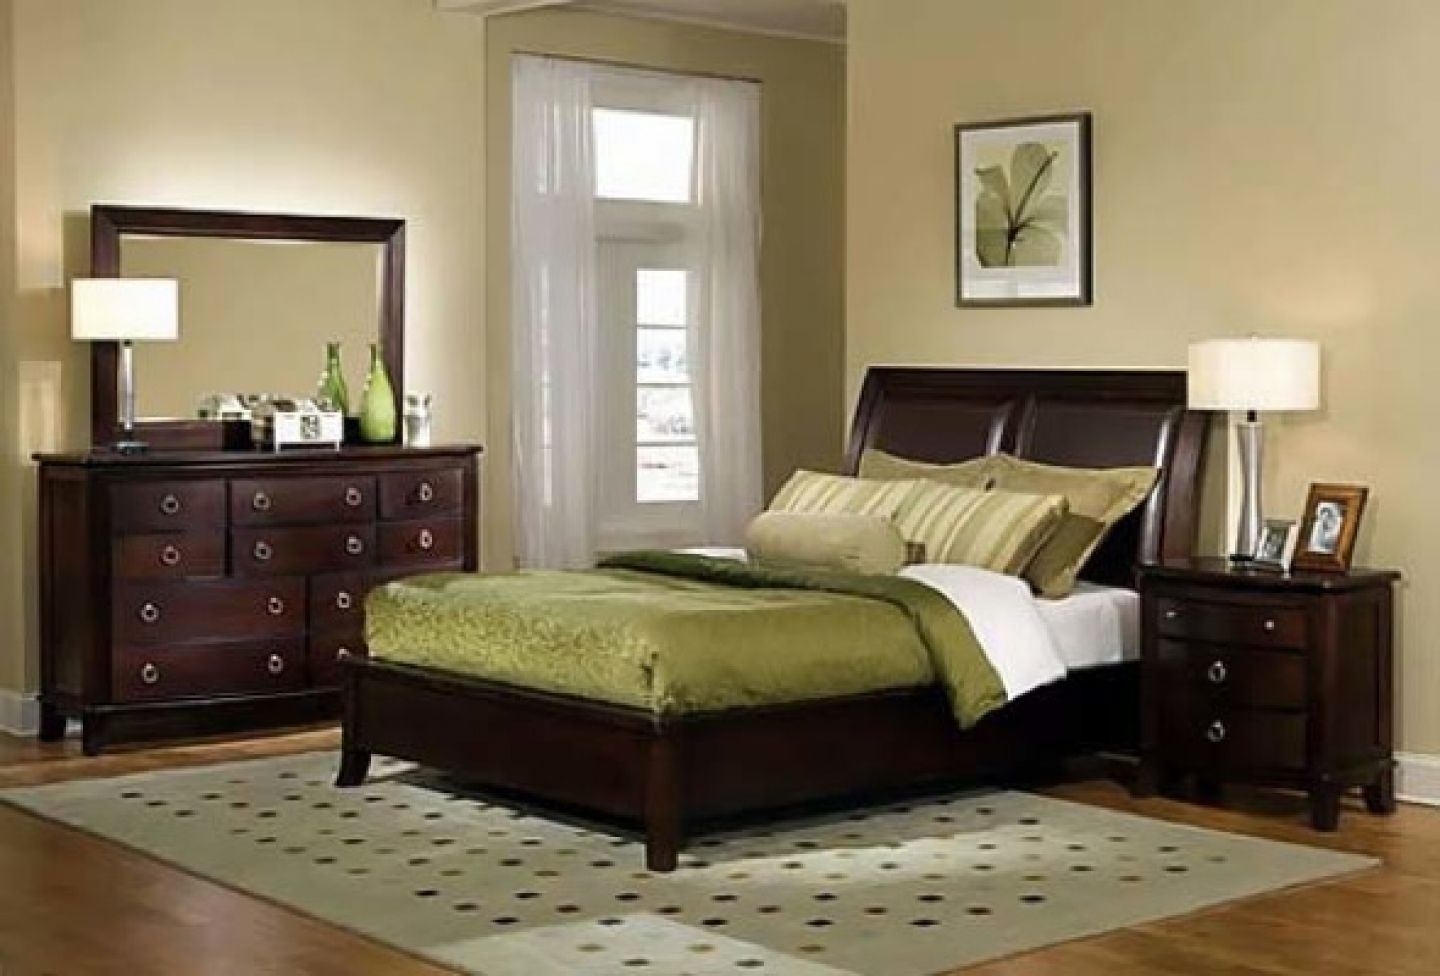 Cream Paint Colors For Bedroom With Dark Furniture With Wood regarding measurements 1440 X 976